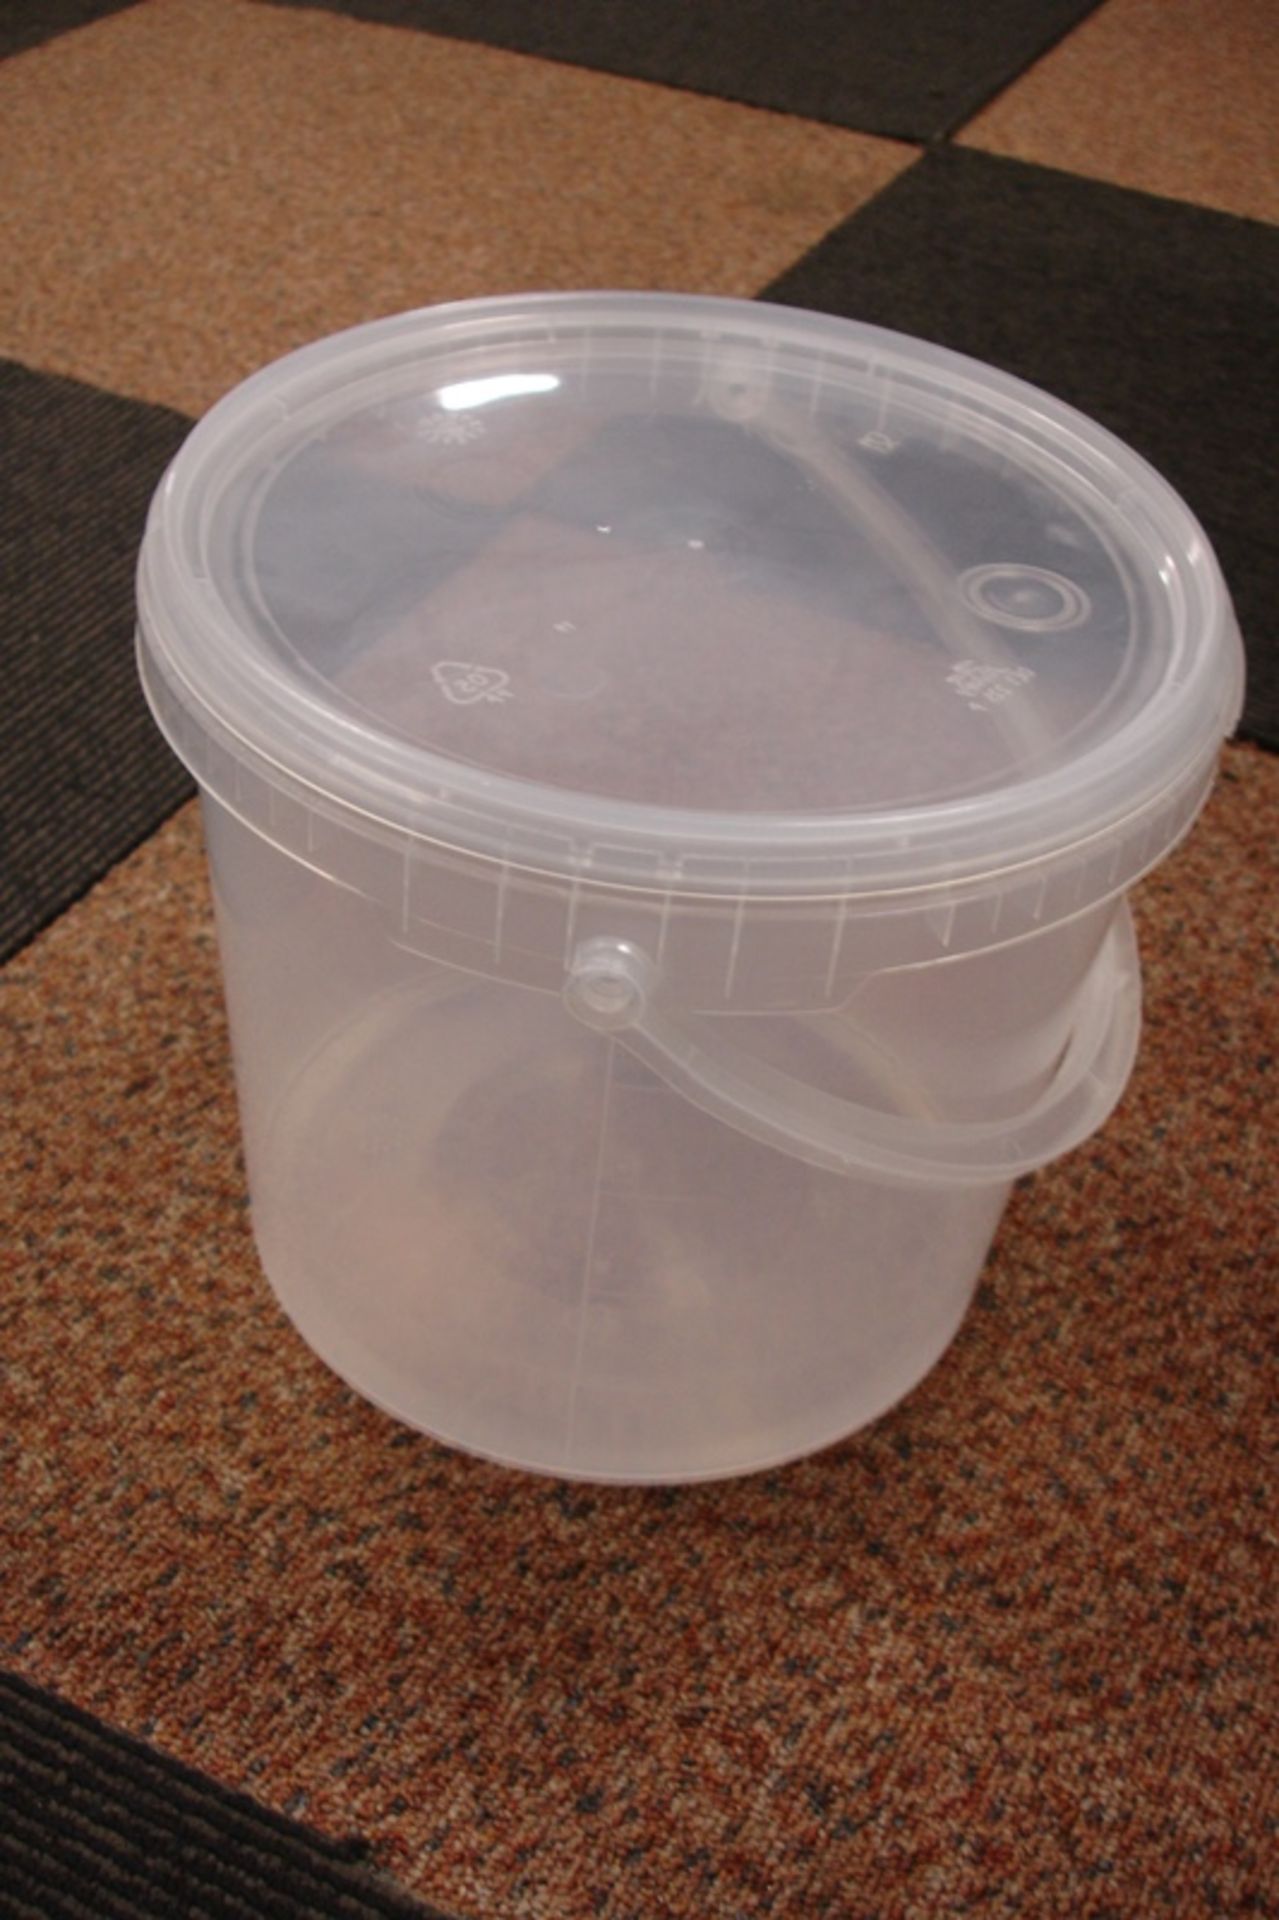 Food Grade 5 litre Clear Plastic Tubs/Buckets with handles and Tamper Evident - Image 4 of 4